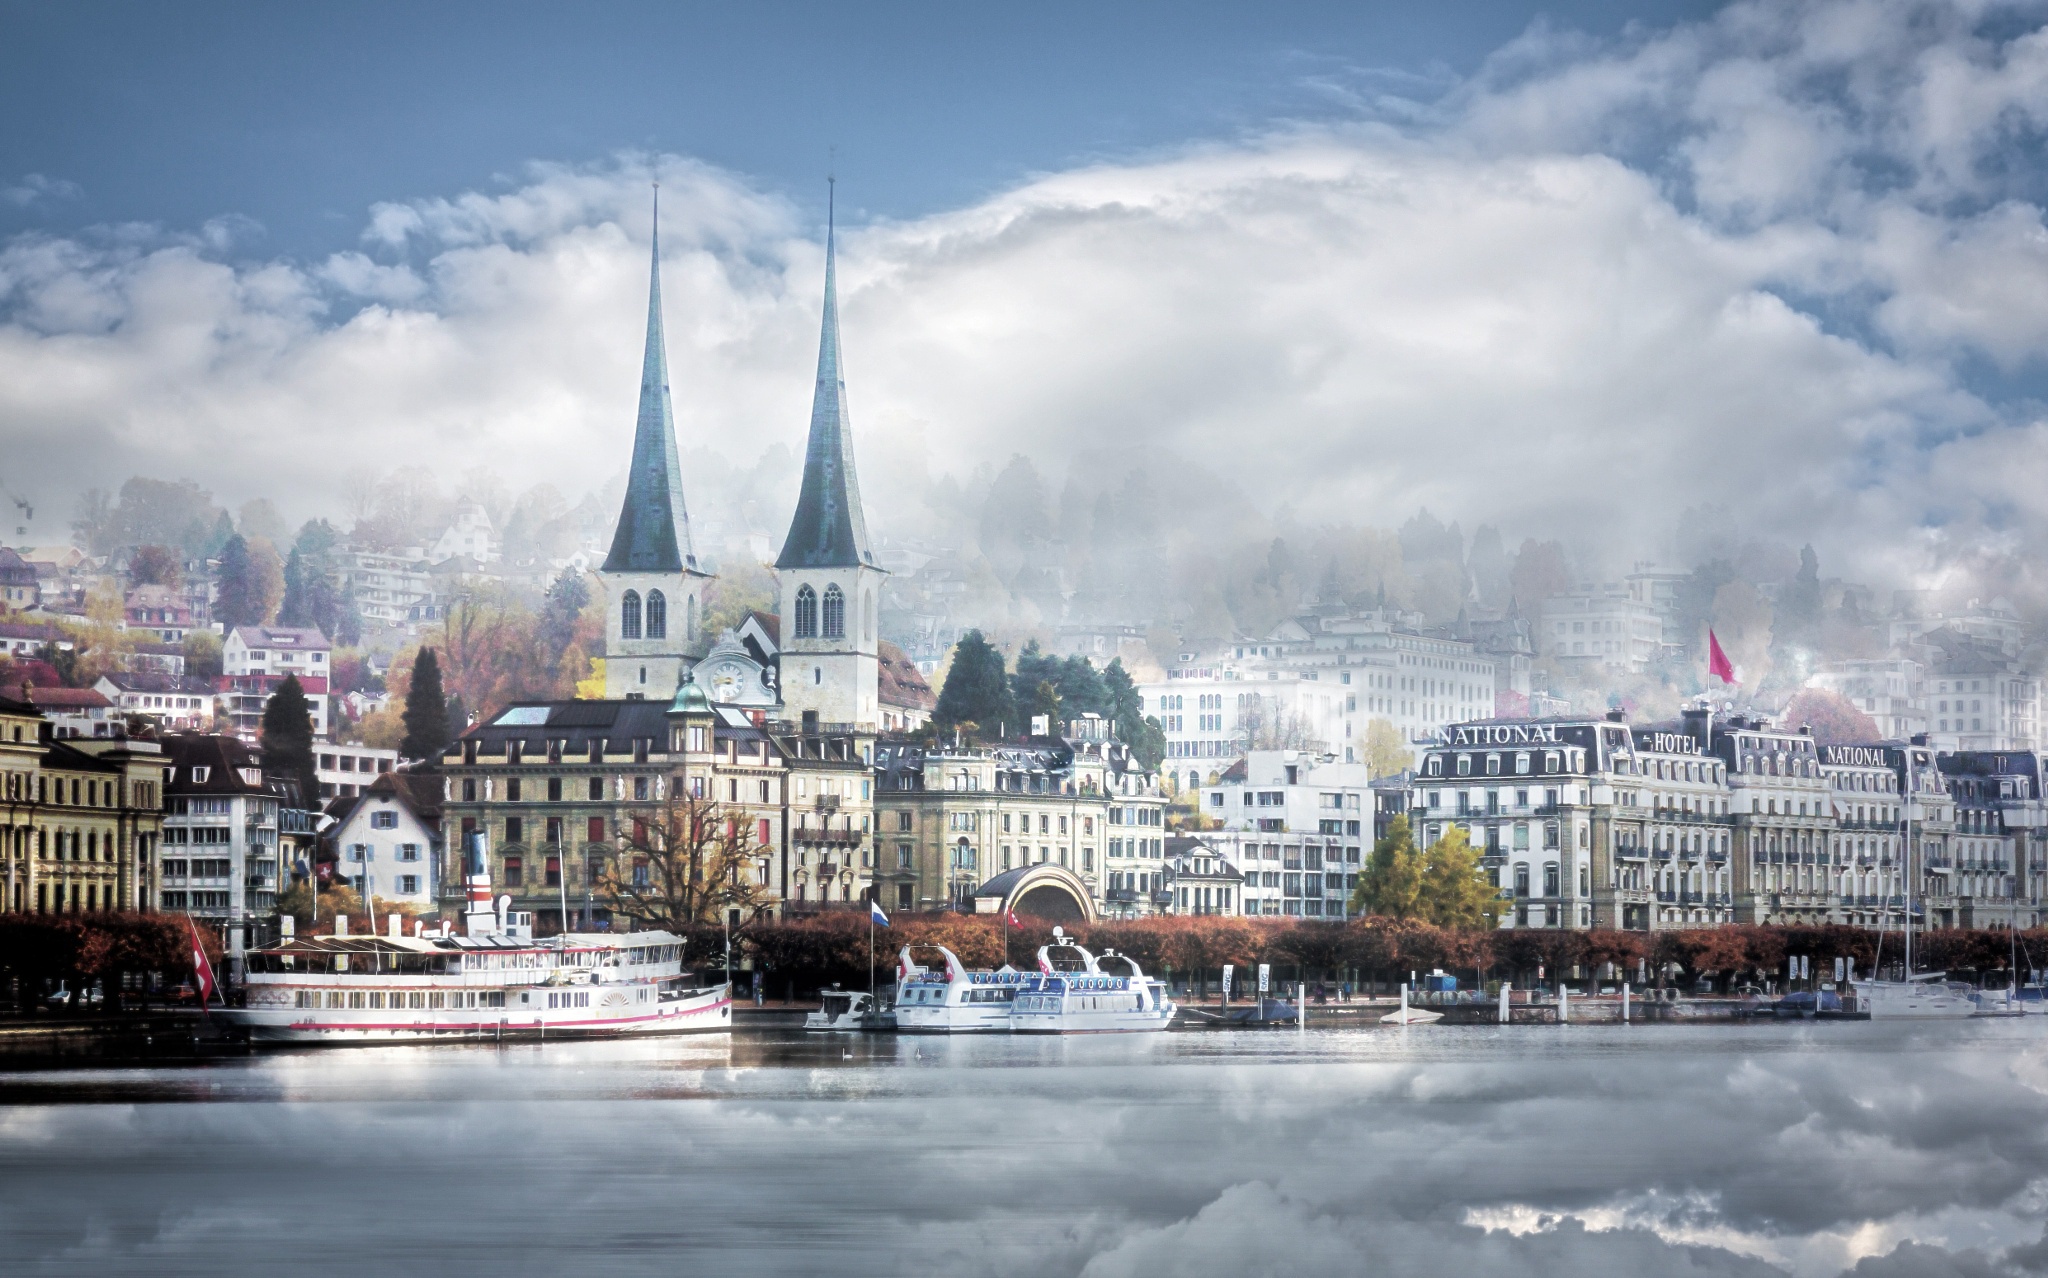 switzerland, man made, lucerne, boat, building, city, cloud, fall, reflection, towns